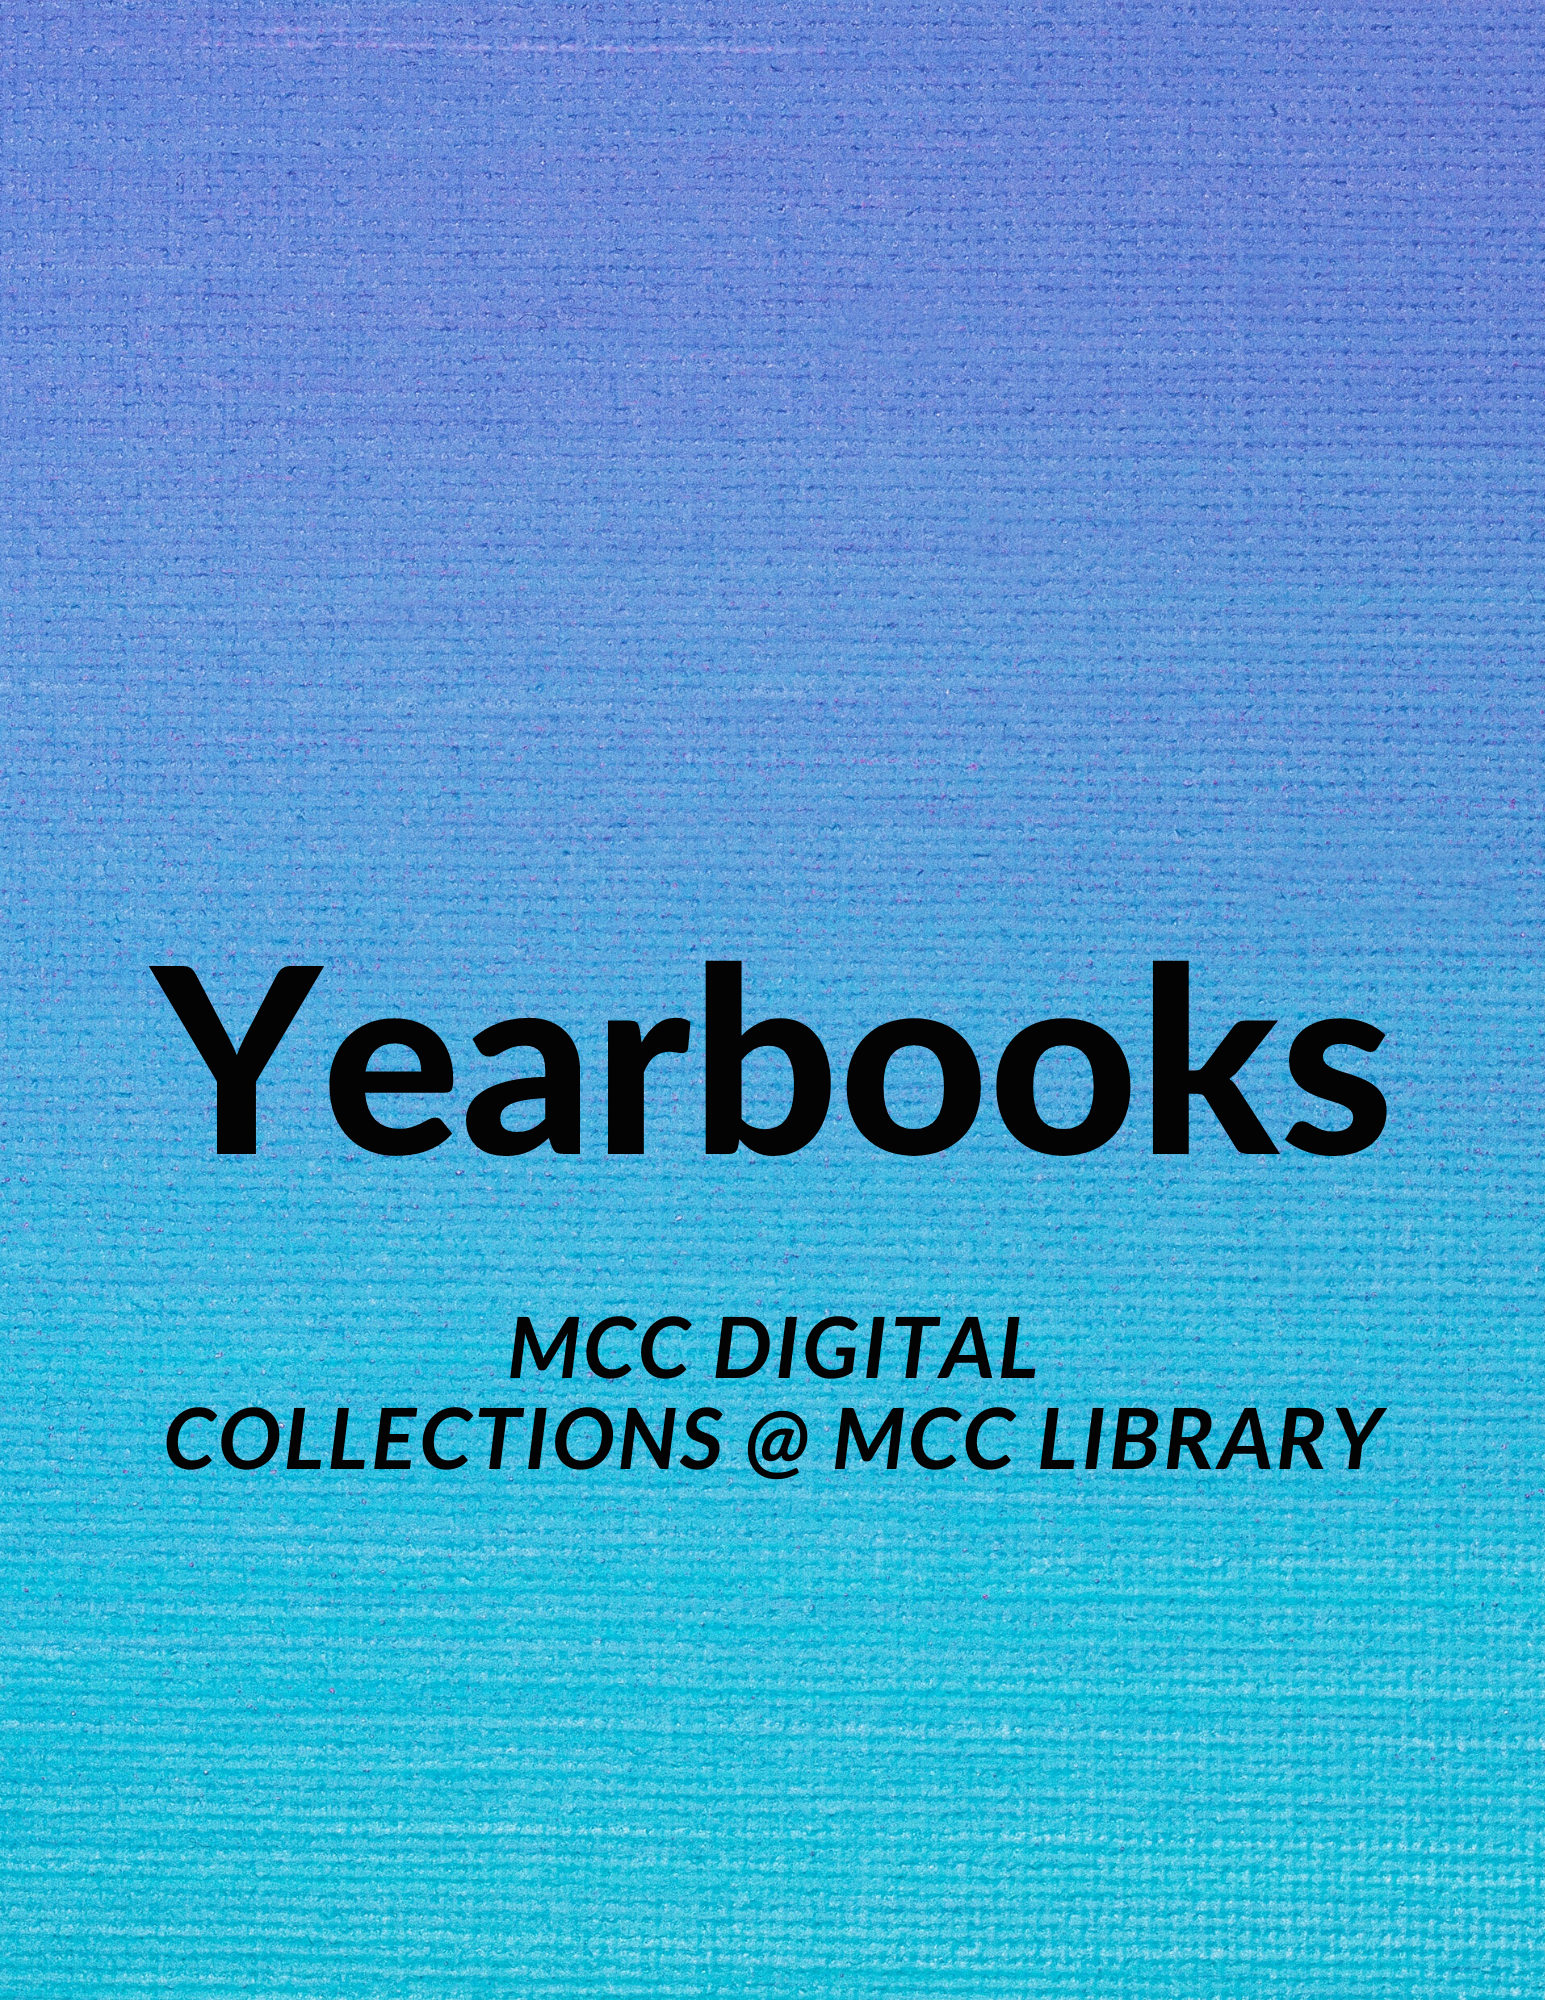 access all yearbooks here